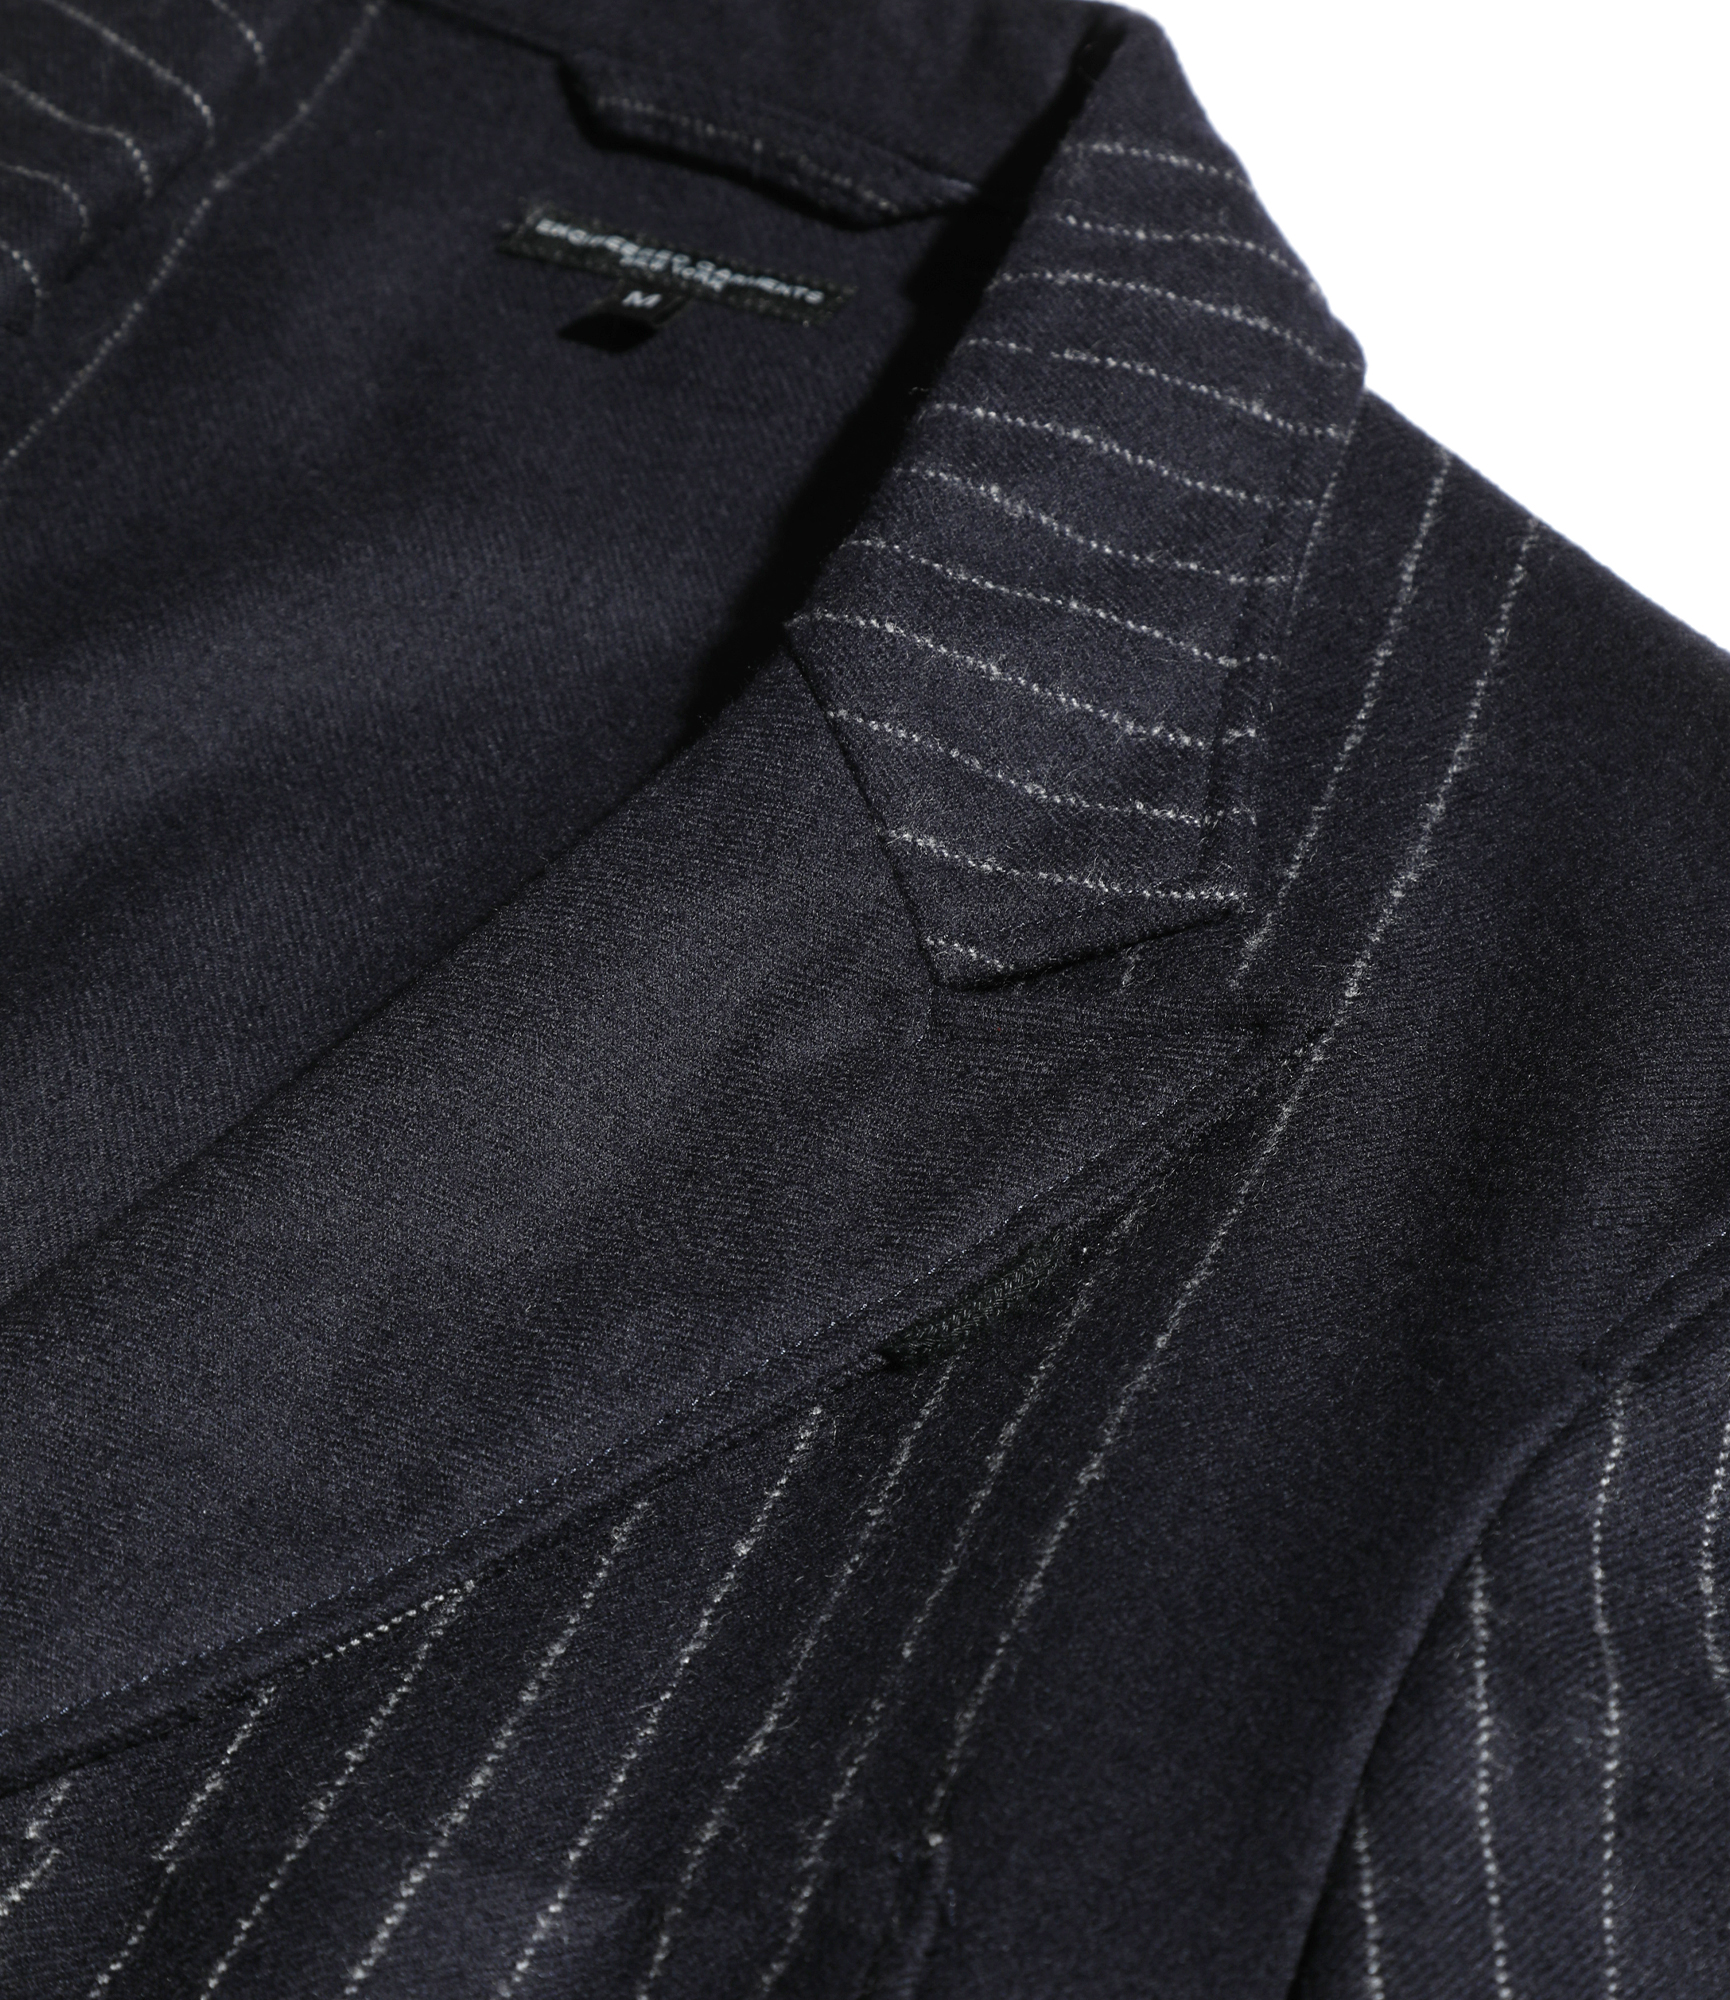 〈ENGINEERED GARMENTS〉2020 FALL WINTER 2-PIECE SUITS